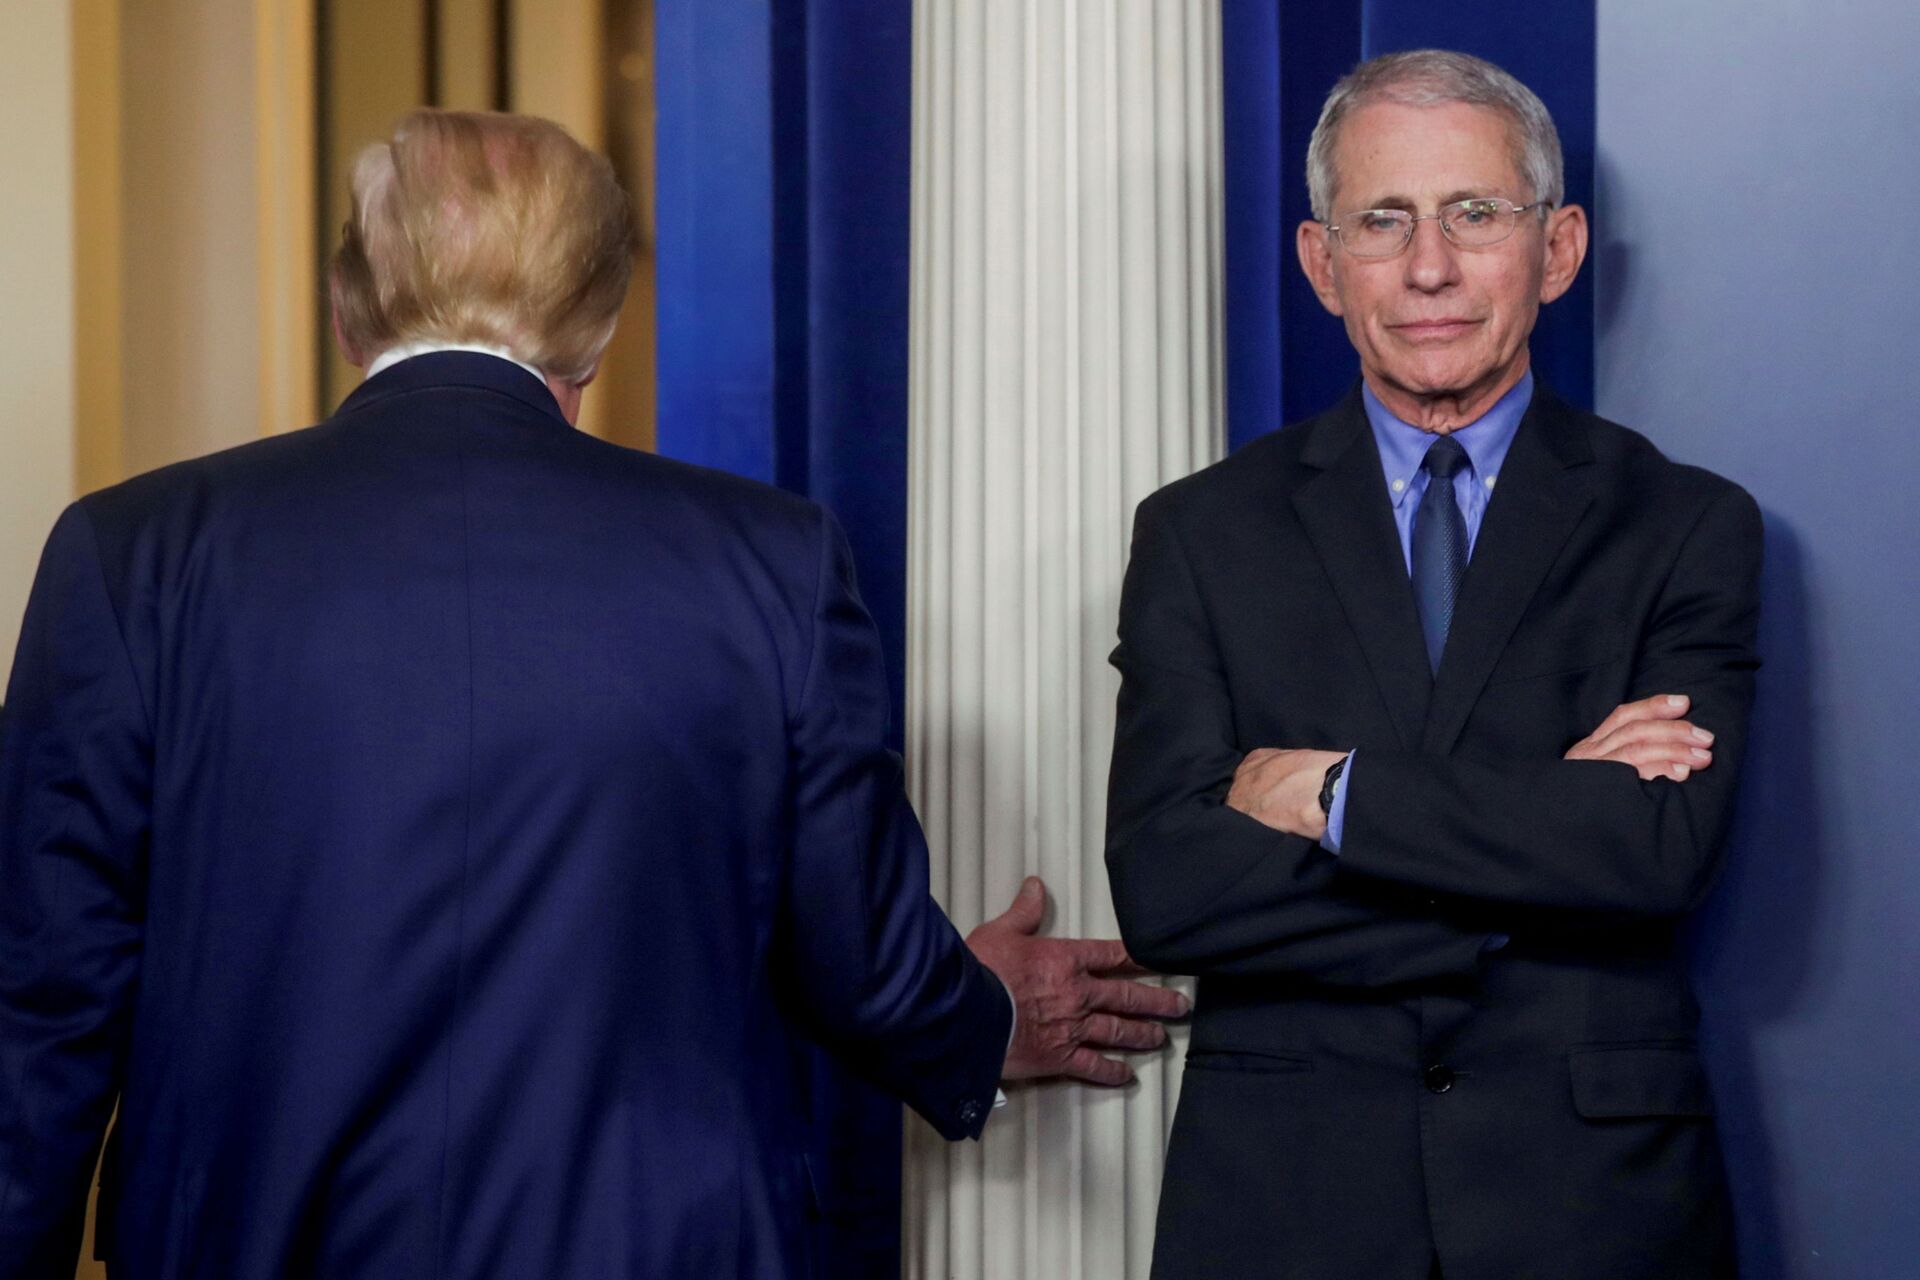 Fauci Reportedly Briefed Health Leaders in 2020 of Potential 'Lab Leak' of 'Unusual' COVID Strain - Sputnik International, 1920, 07.06.2021